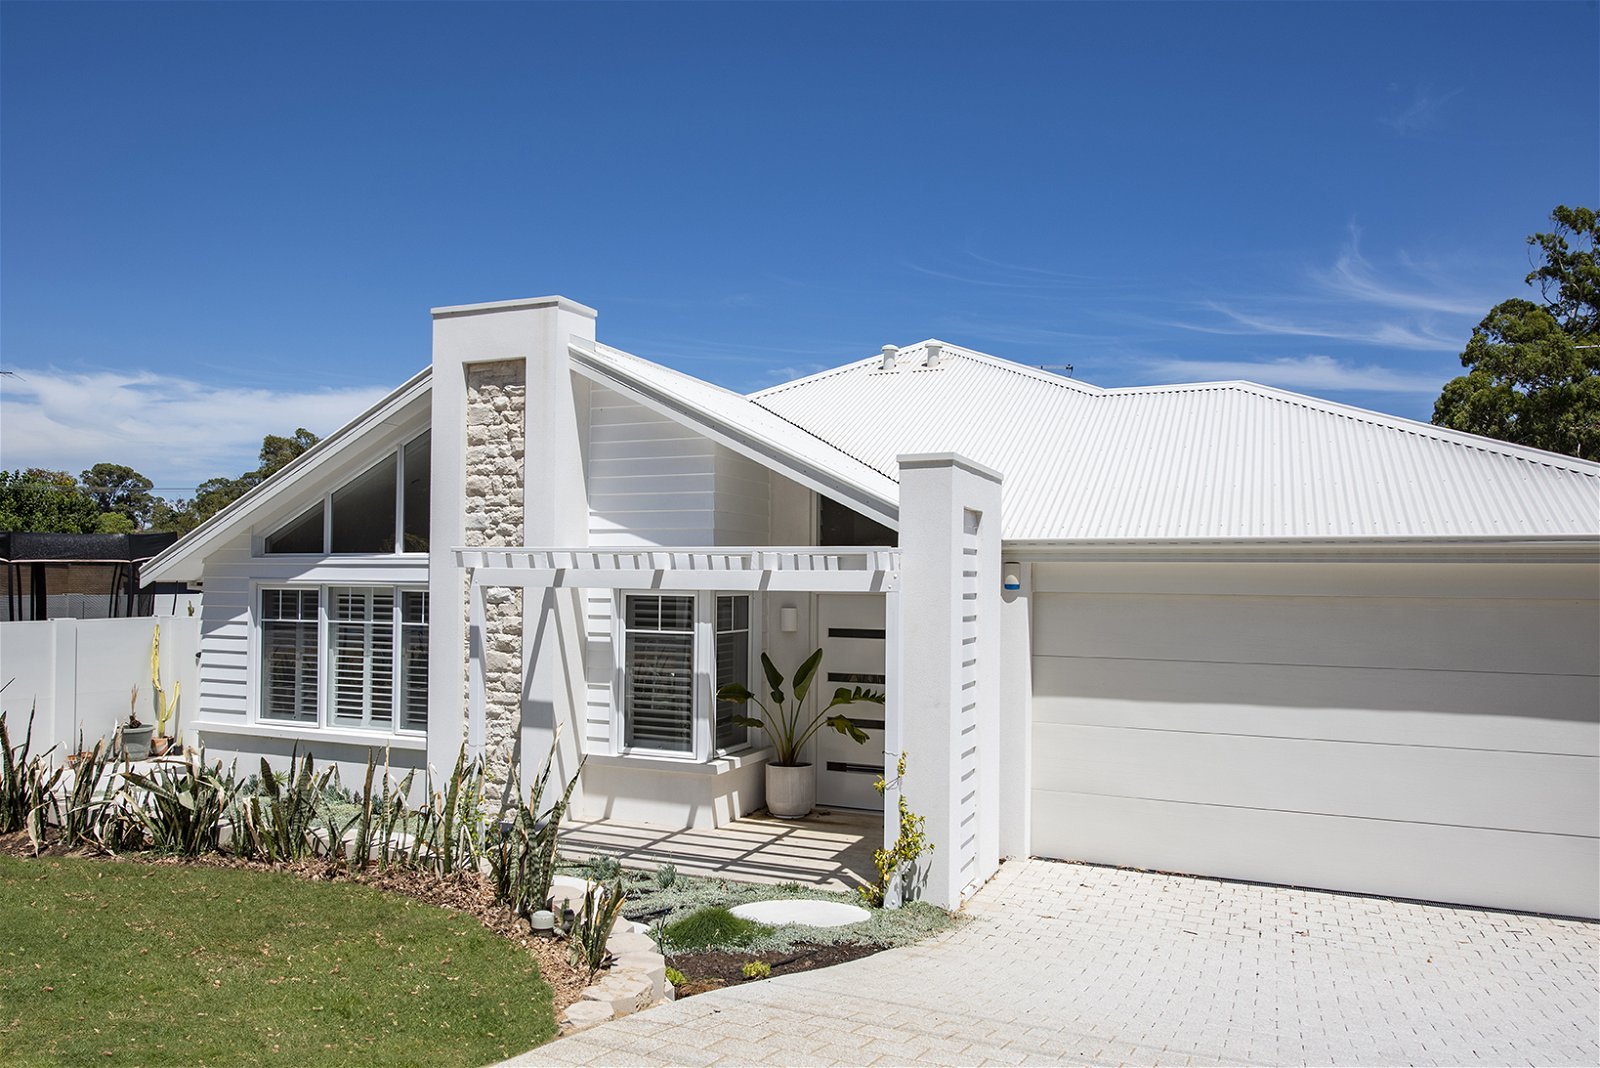 Wa Country Builders - Duncraig - Gallery - 2861 Best Contract Homes 370 430K Rural Building Company 02 Edit